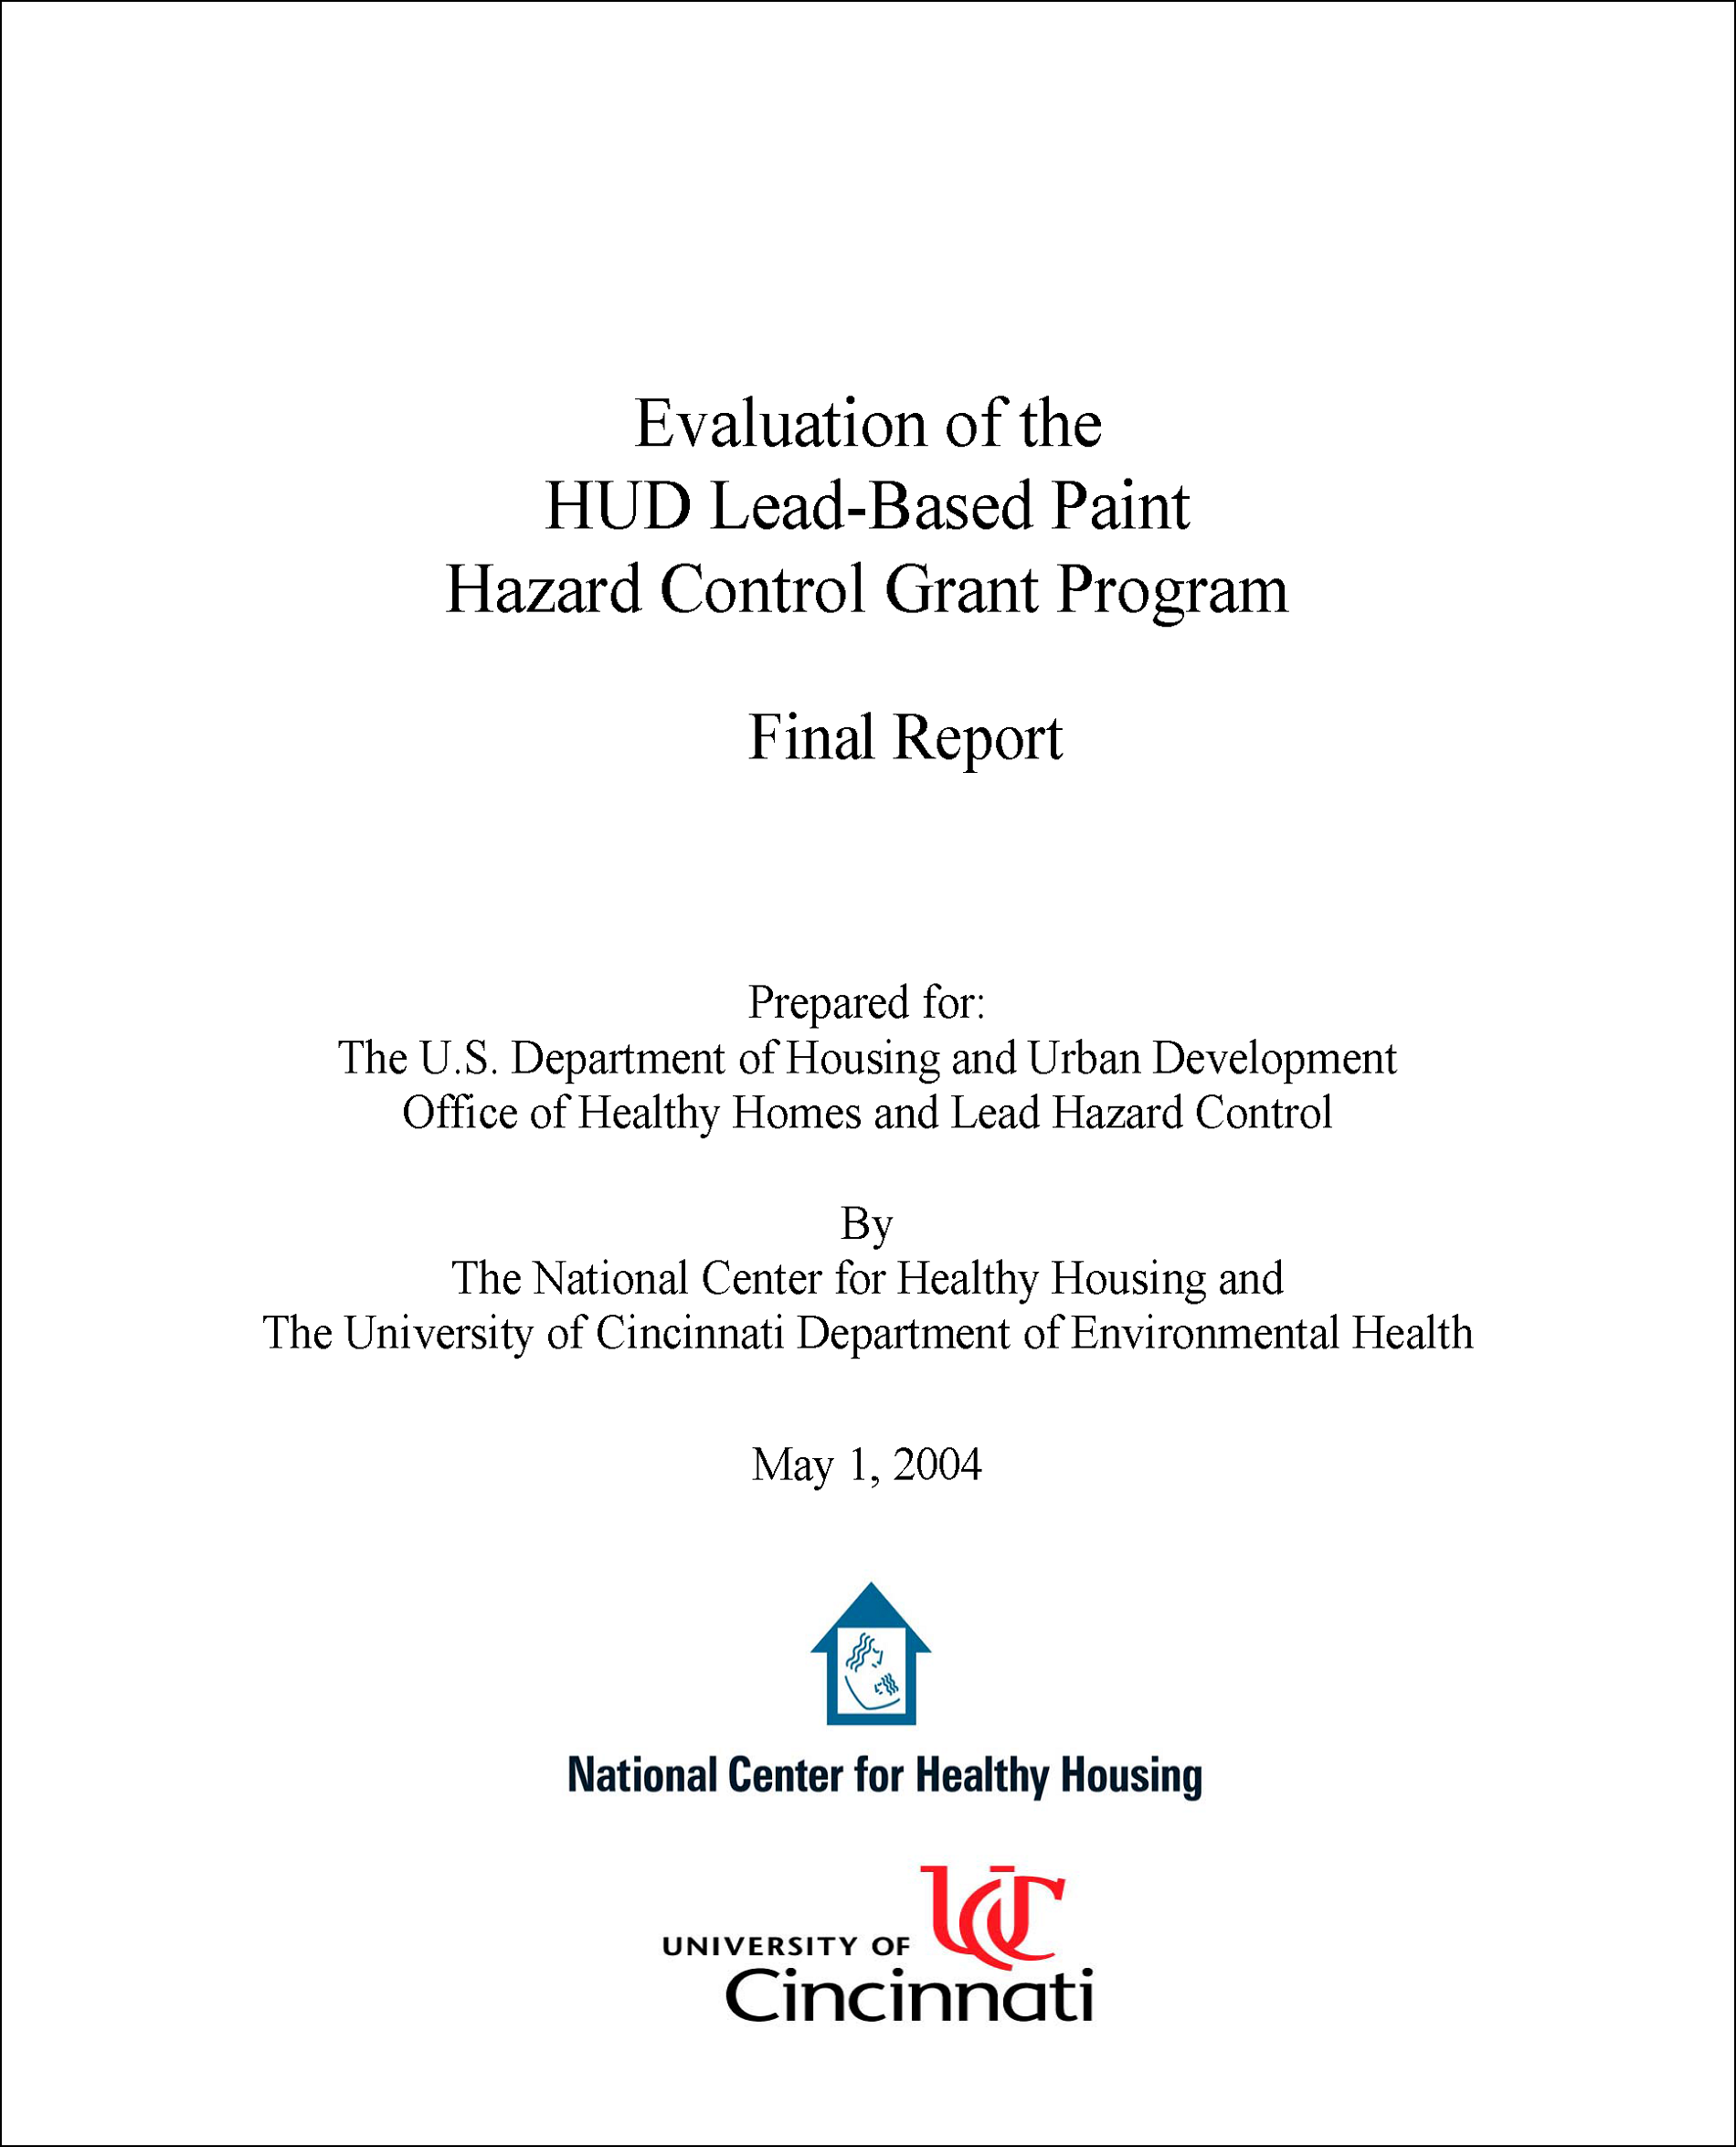 Report - Evaluation of the HUD Lead-Based Paint Hazard Control Grant Program: Final Report